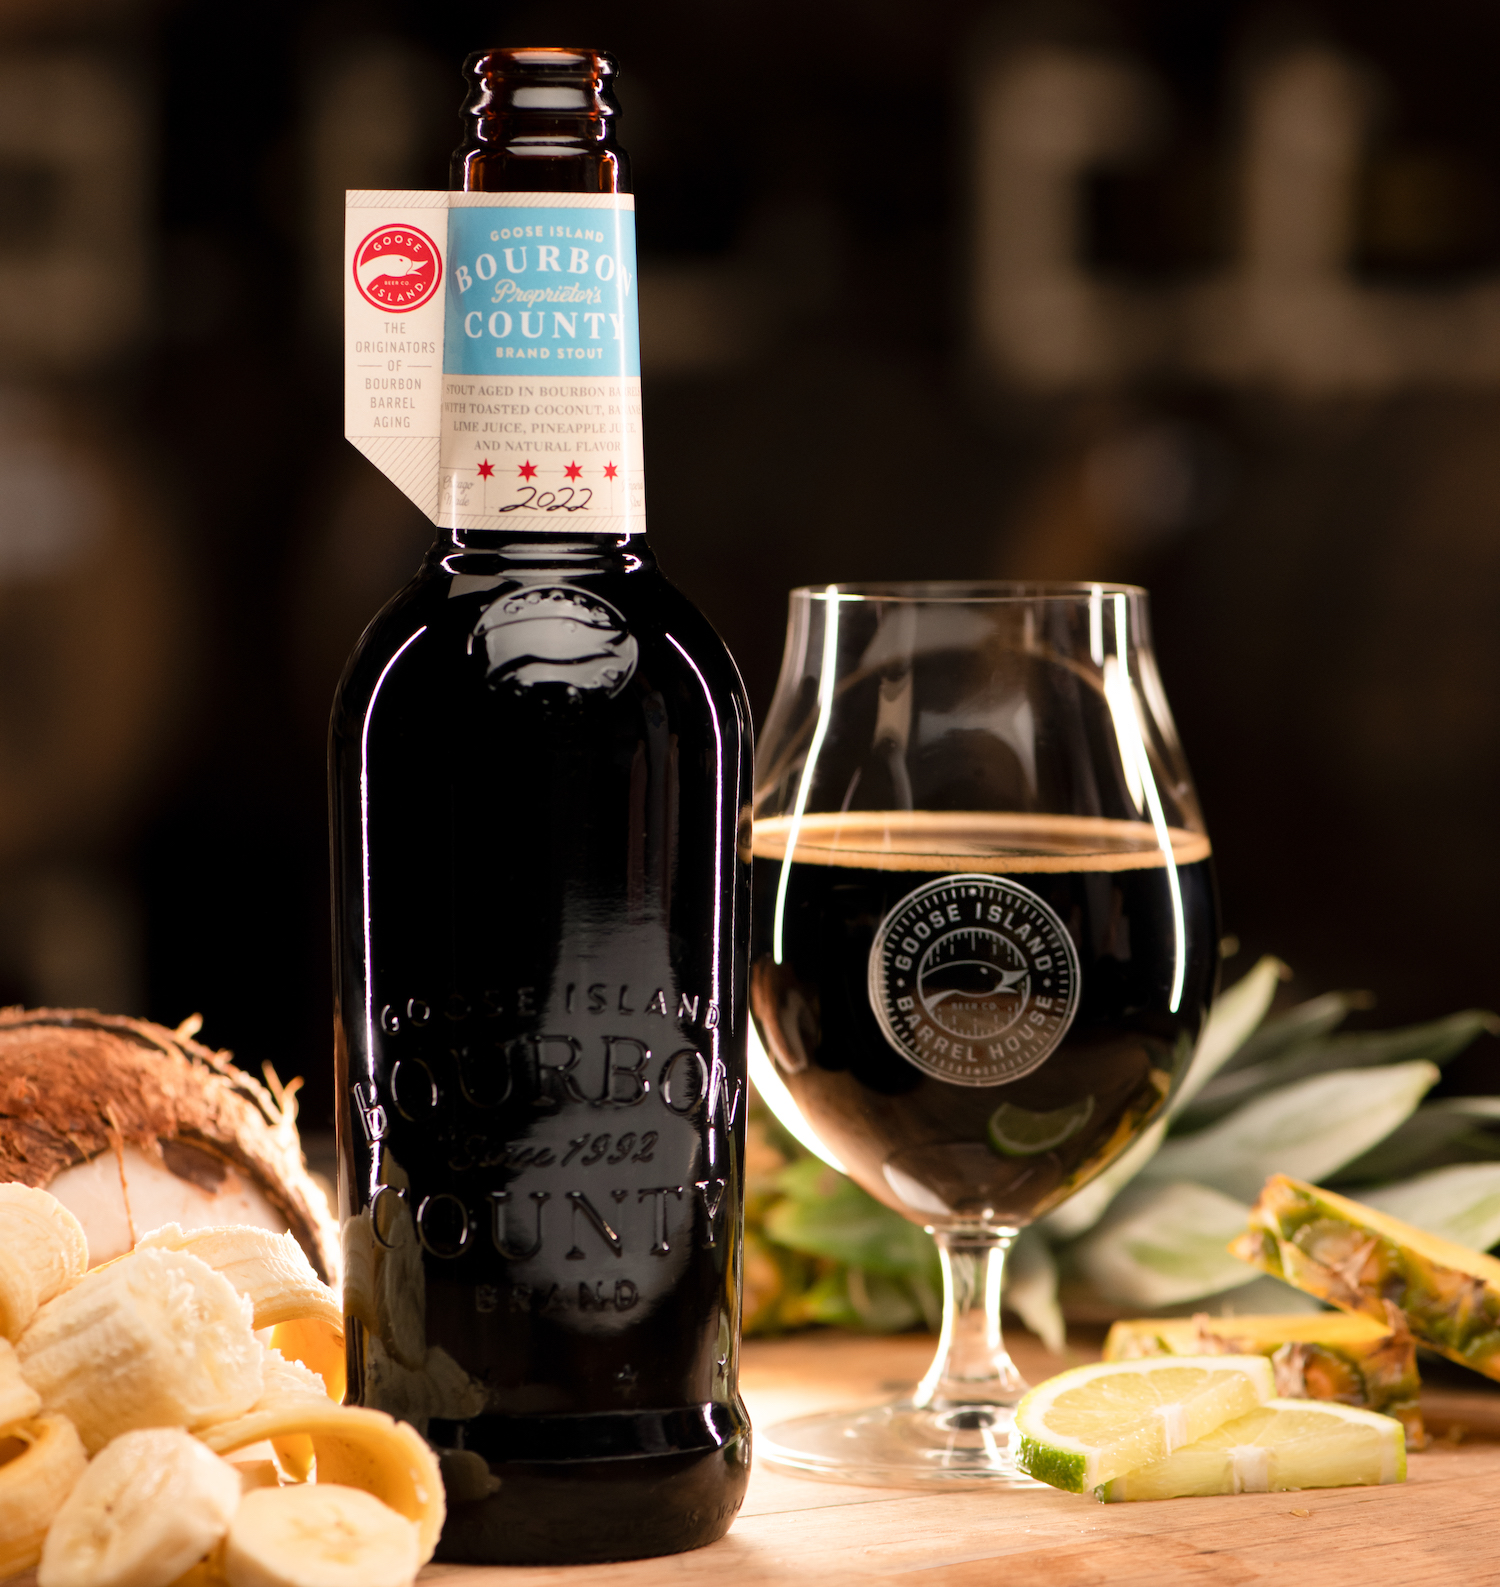 Tasting (And Ranking) Goose Island's 2022 Bourbon County Stout Lineup